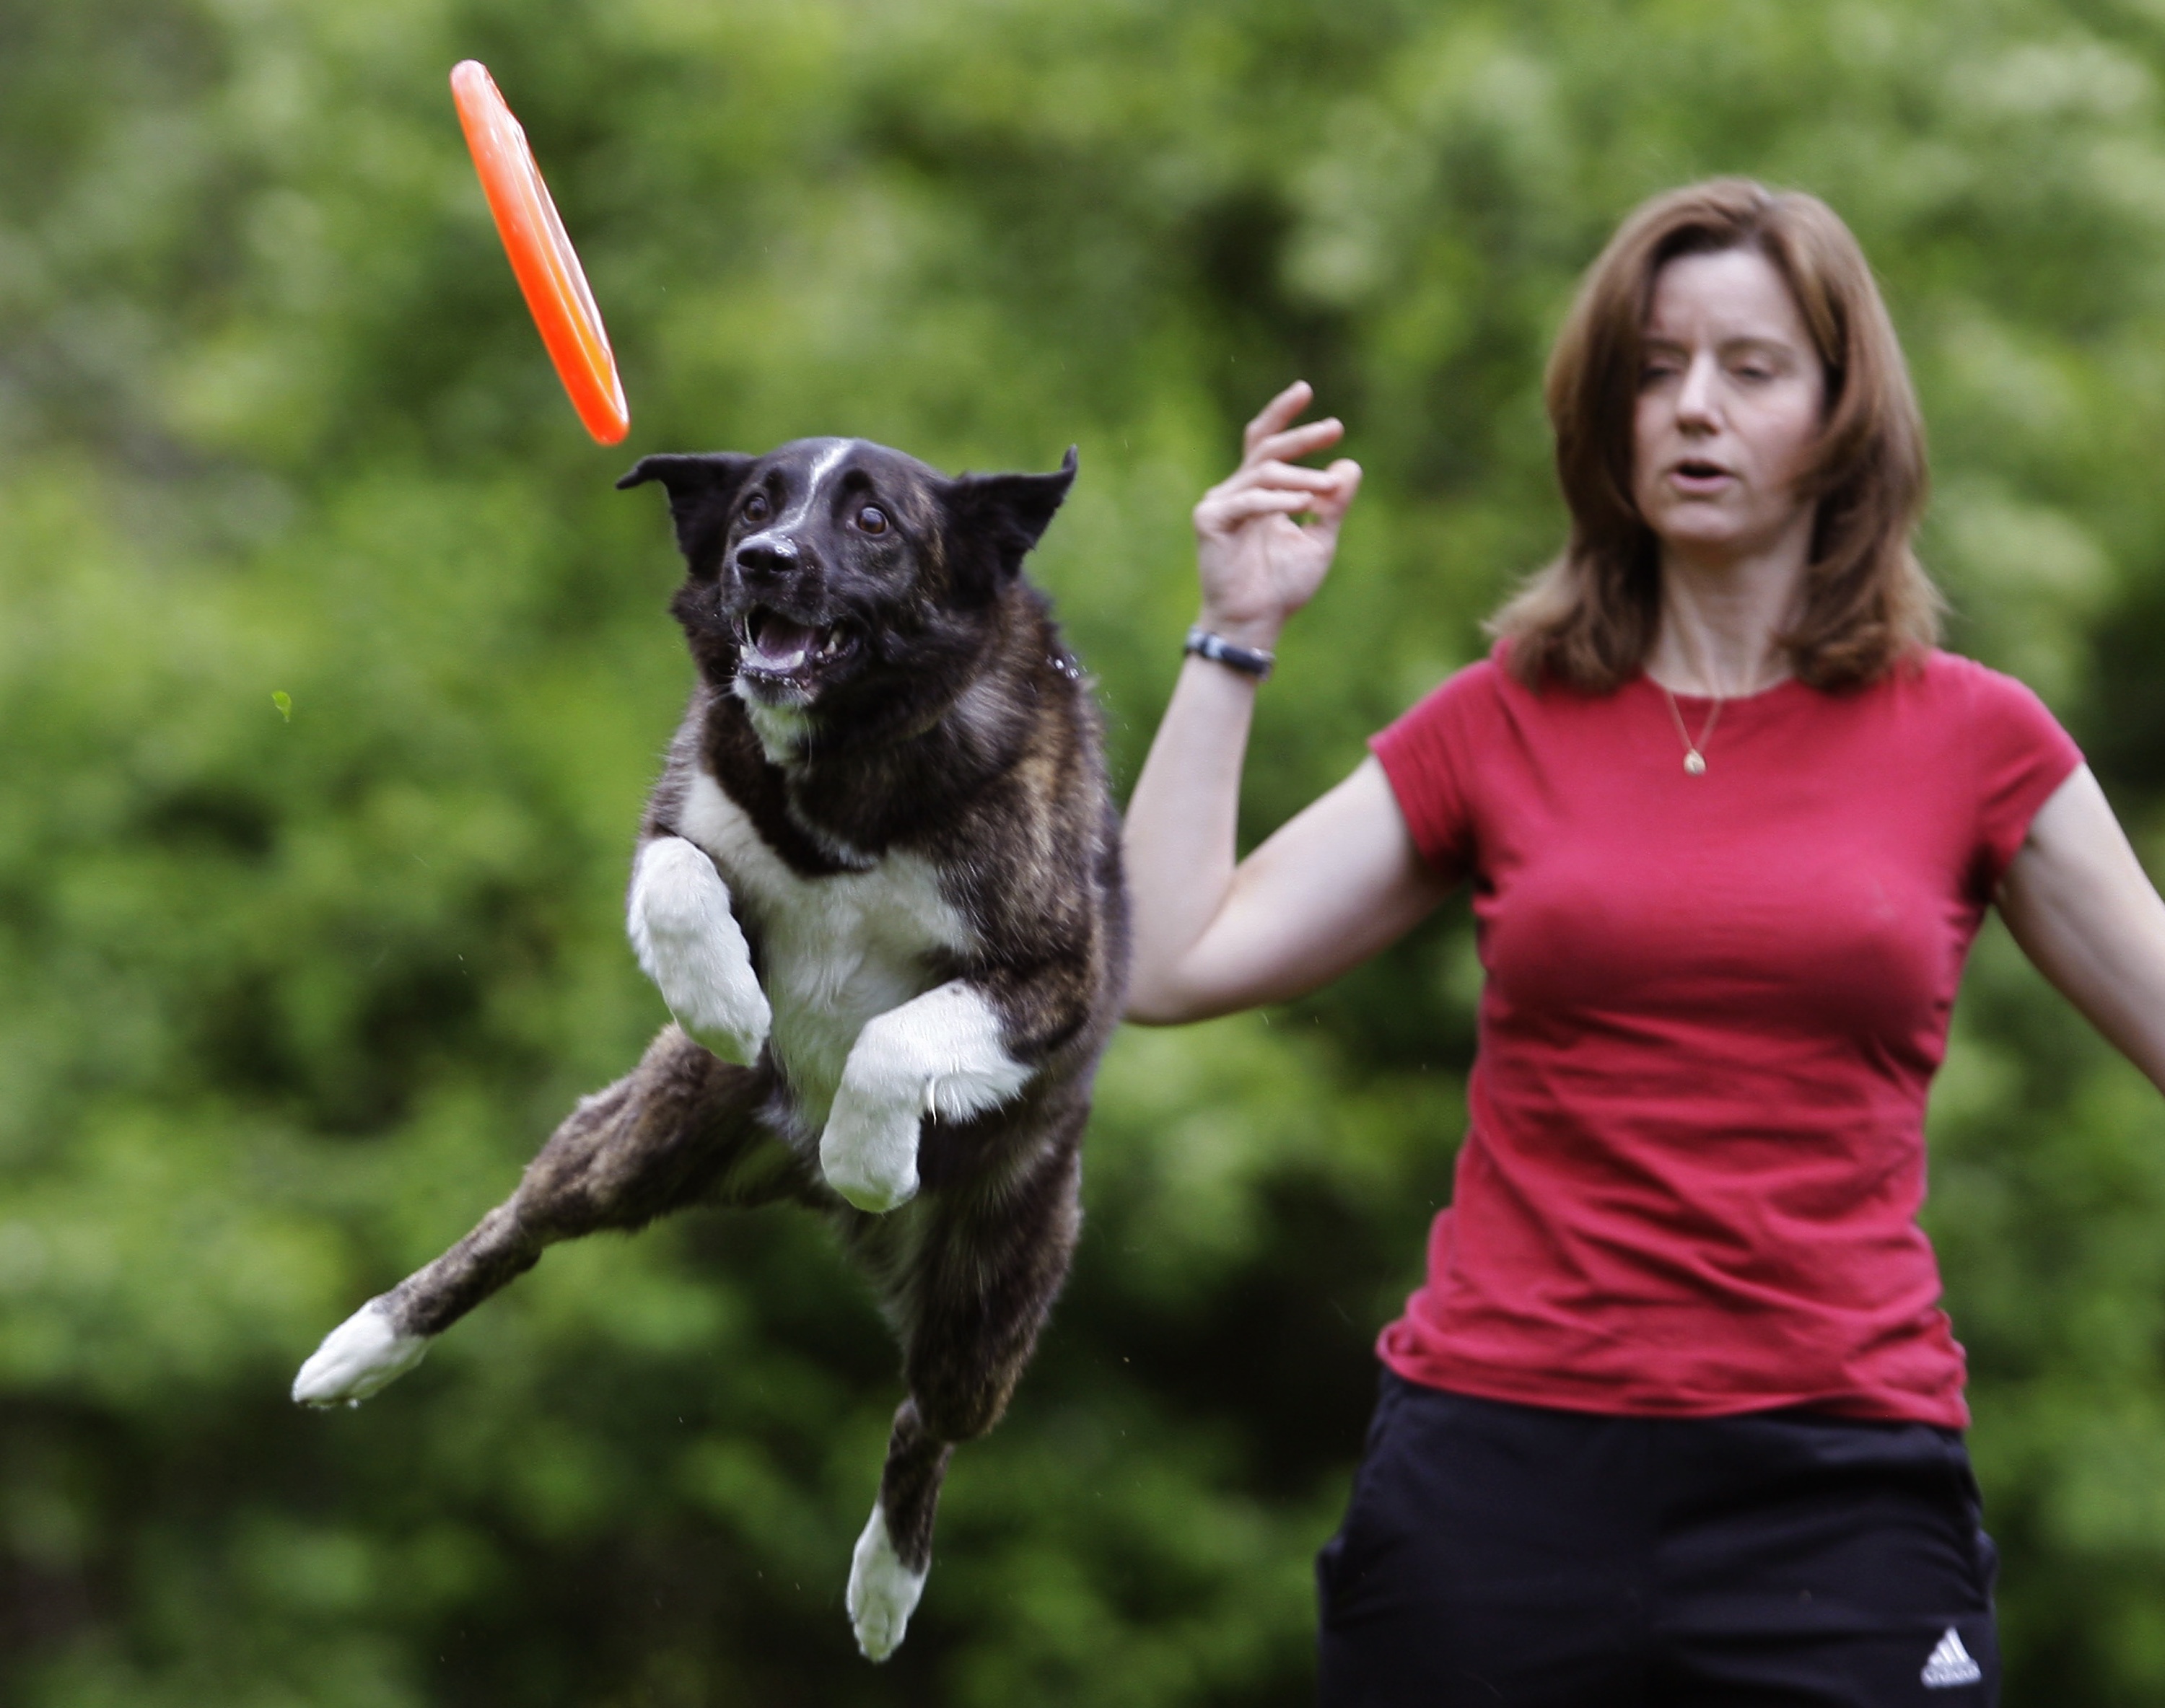 Dog new tricks. The spokesman-Review. Toy can't teach an old Dog New Tricks.